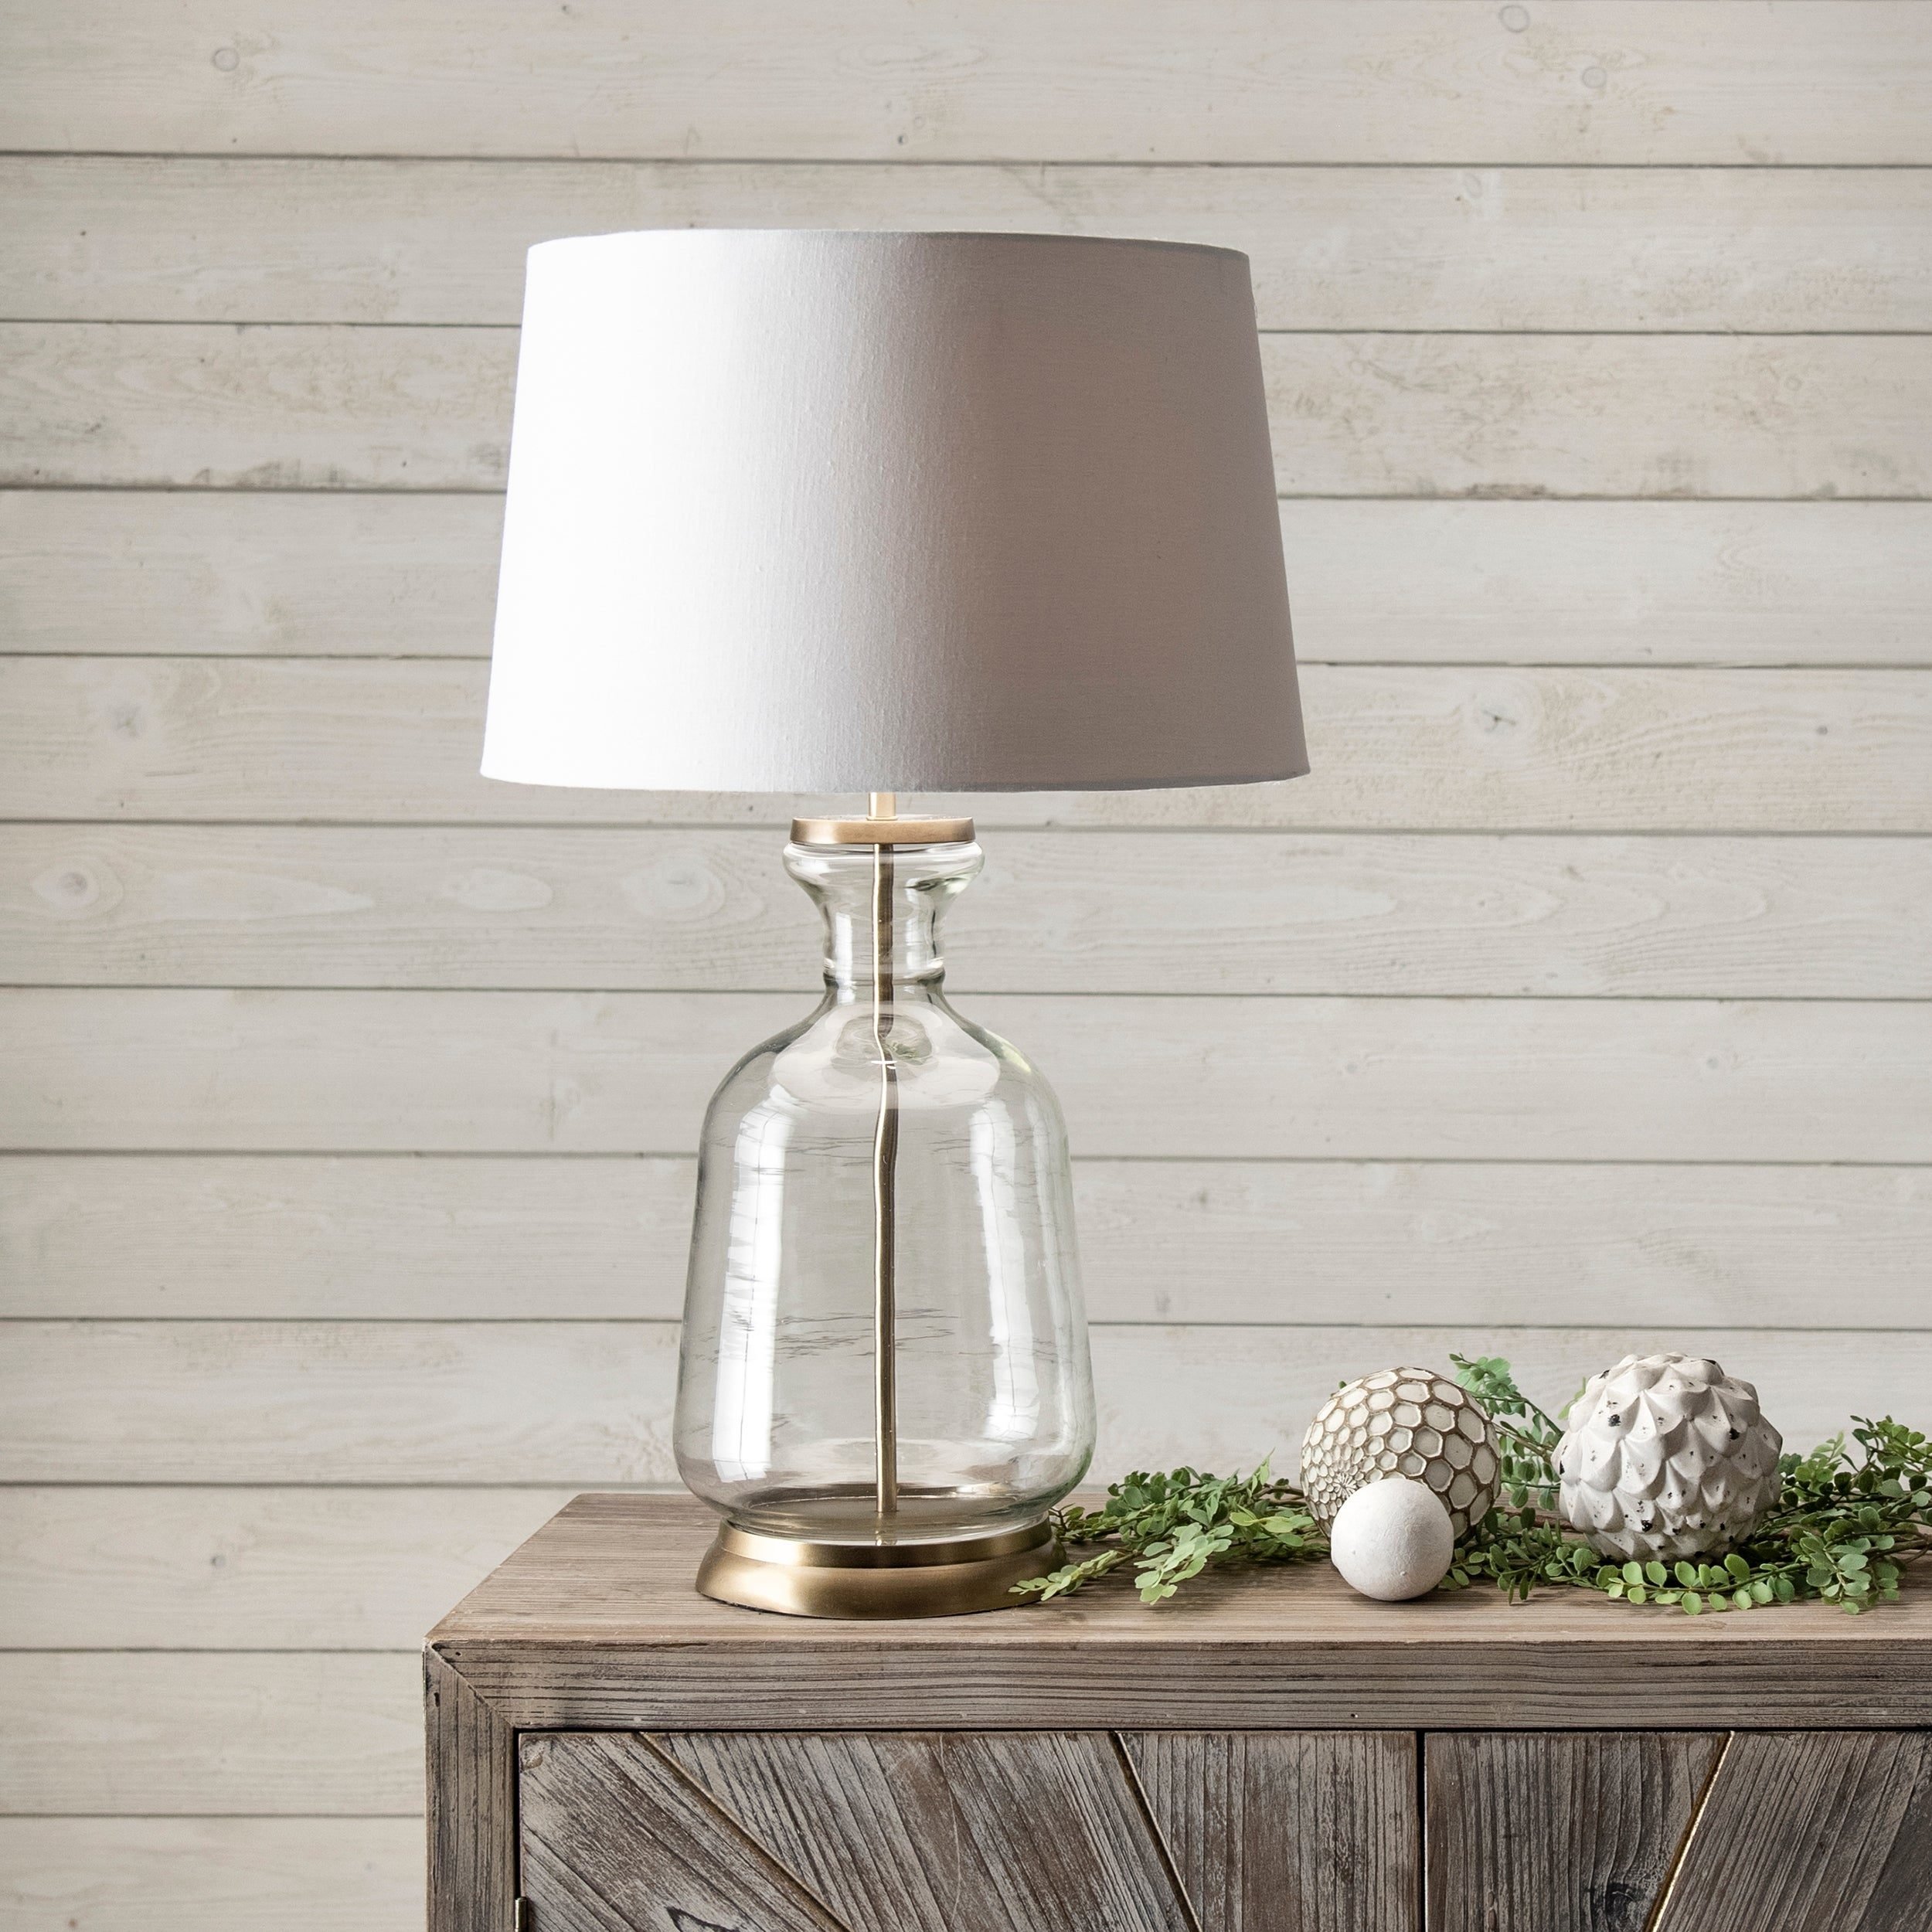 12 Modern Table Lamps That Are Trending in 2022, According to an Expert